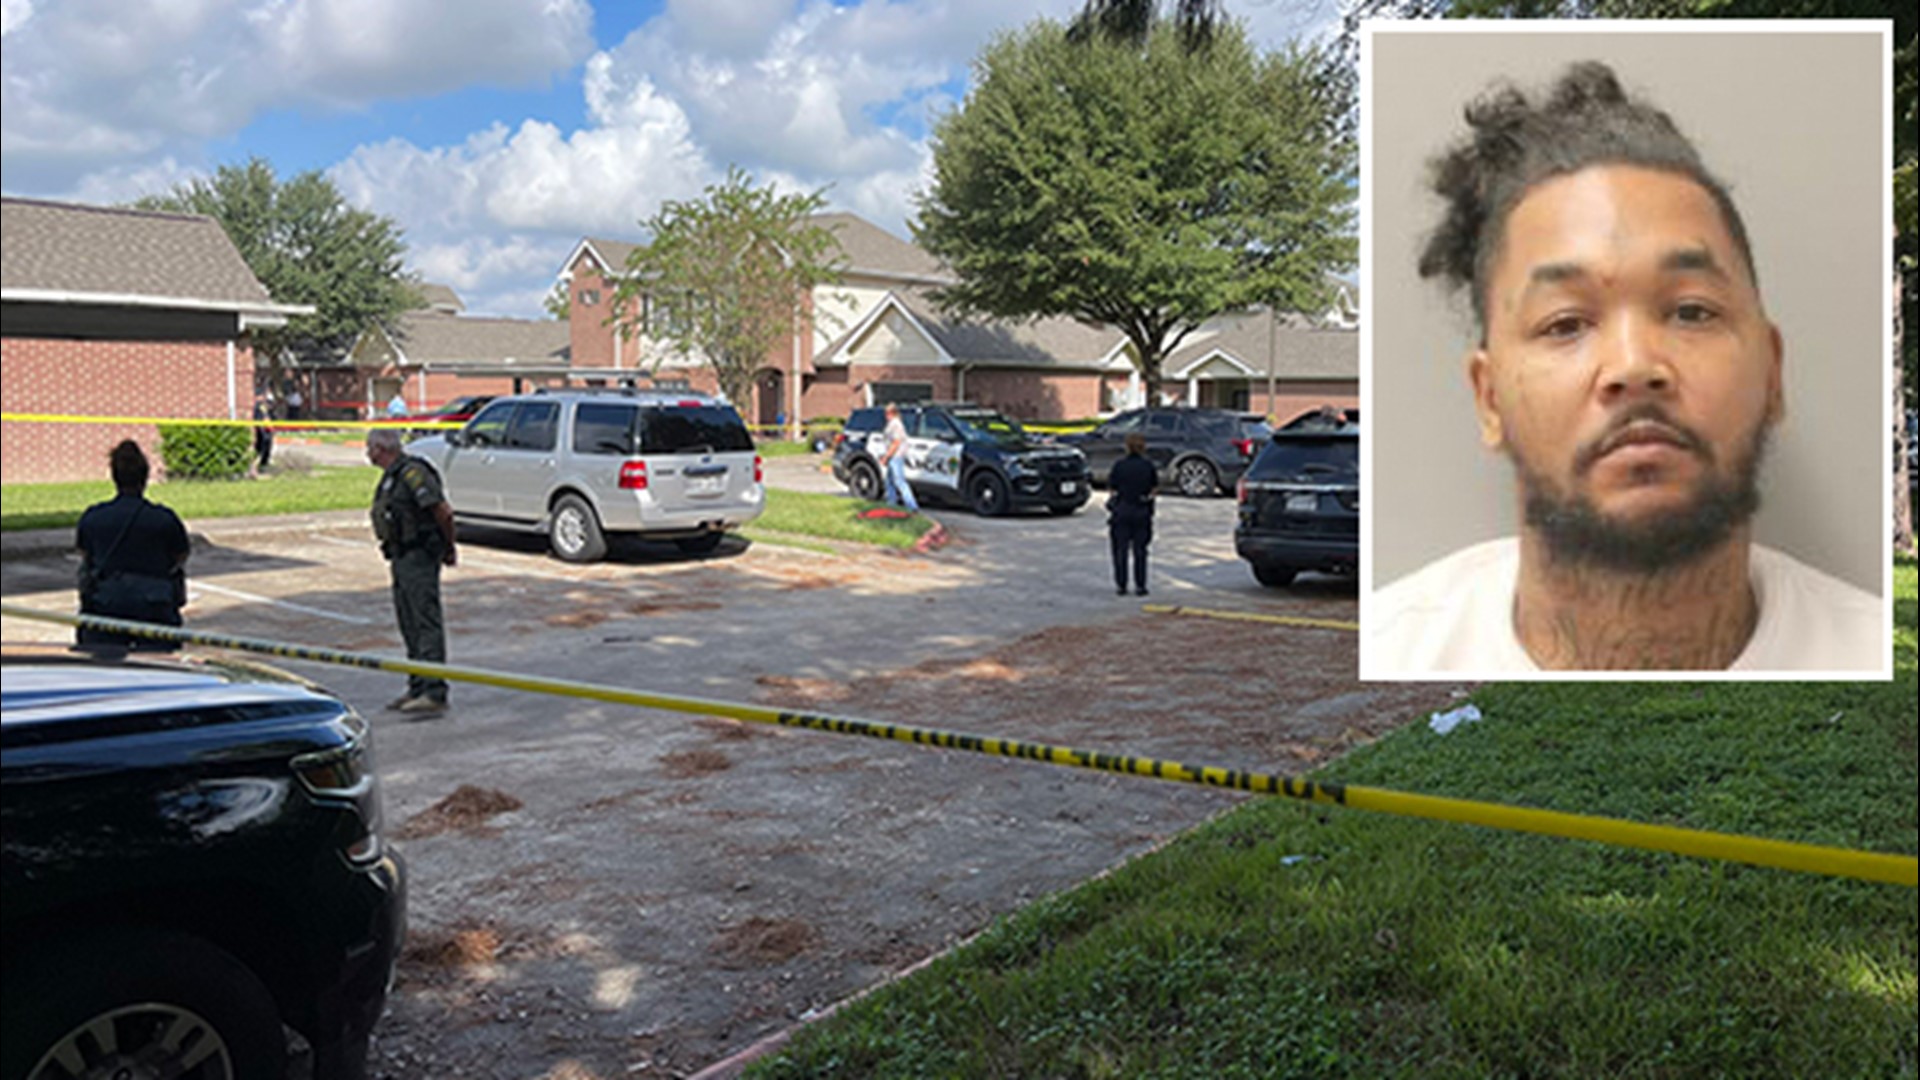 Suspect Deon Ledet died in a shootout with HPD officers at a northeast Houston apartment complex. Officer William "Bill" Jeffery was also killed, police said.